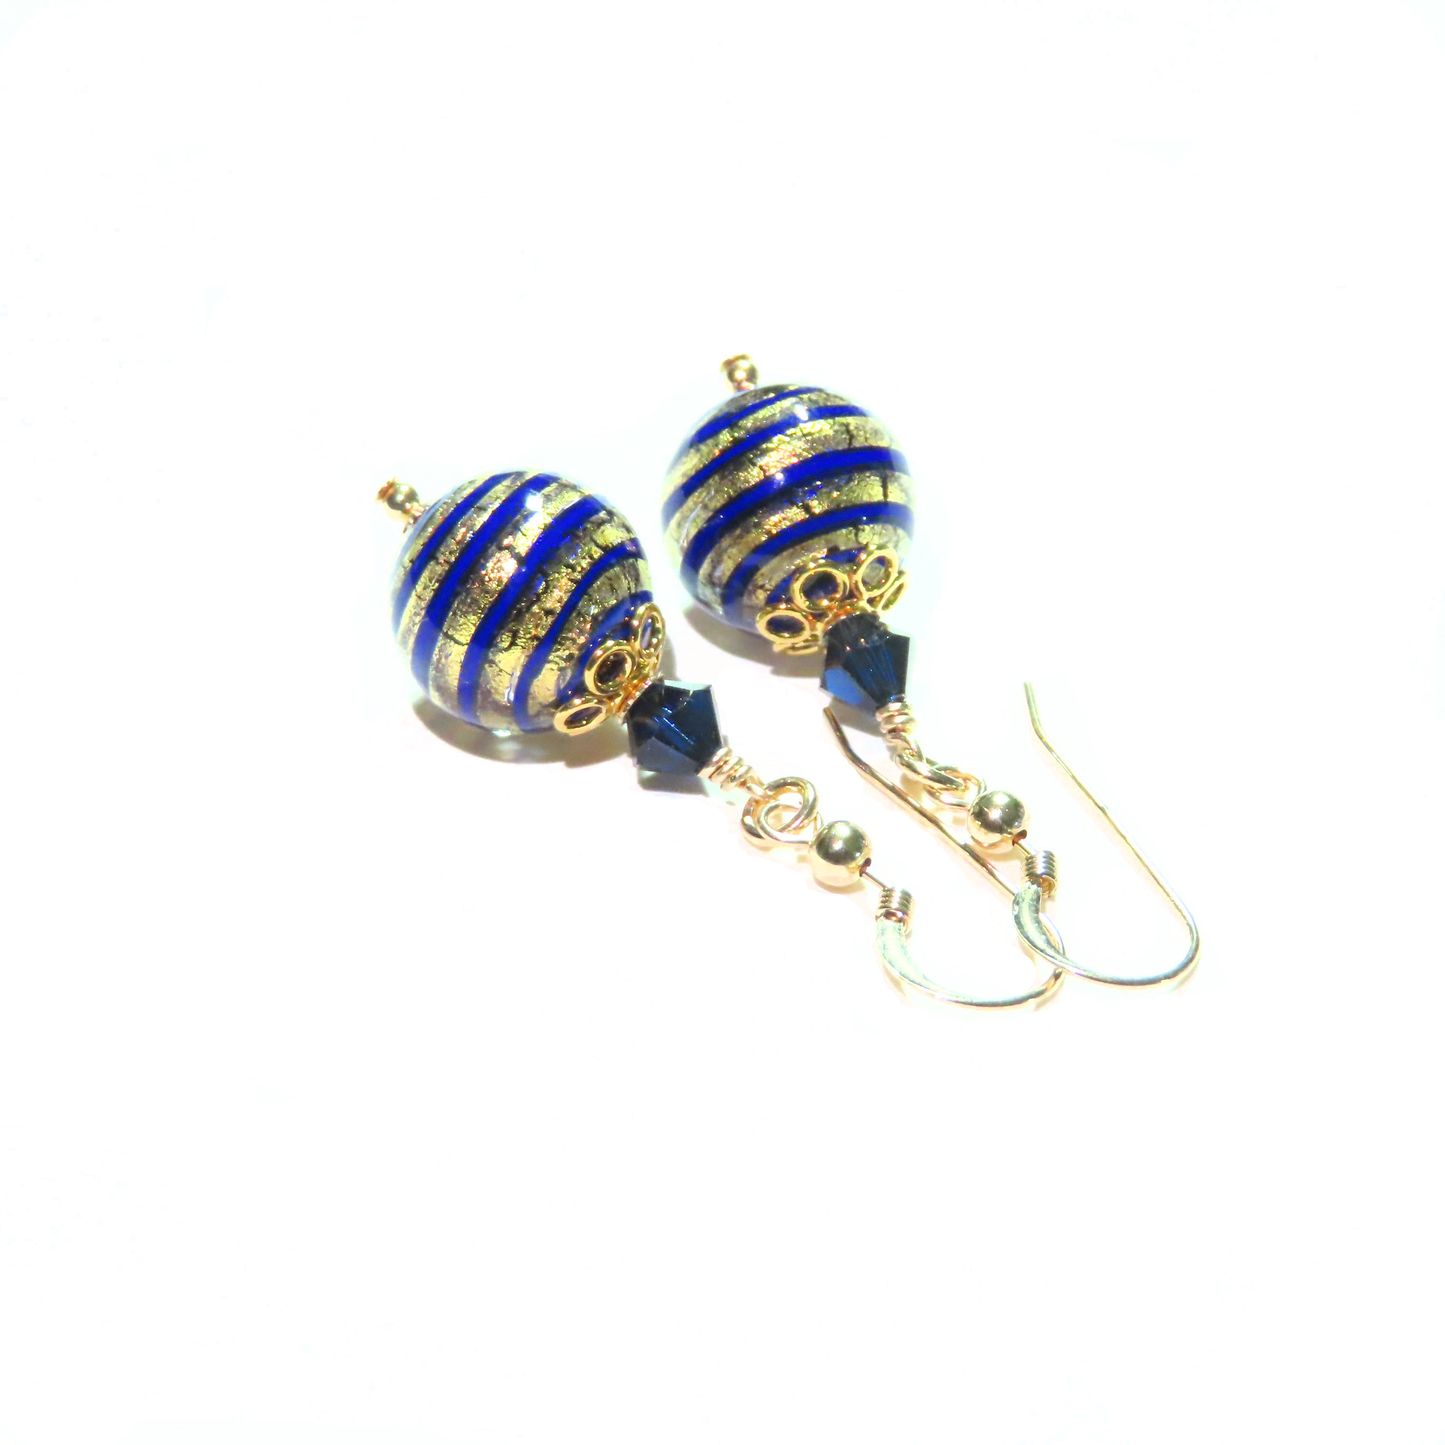 a pair of blue and gold striped earrings